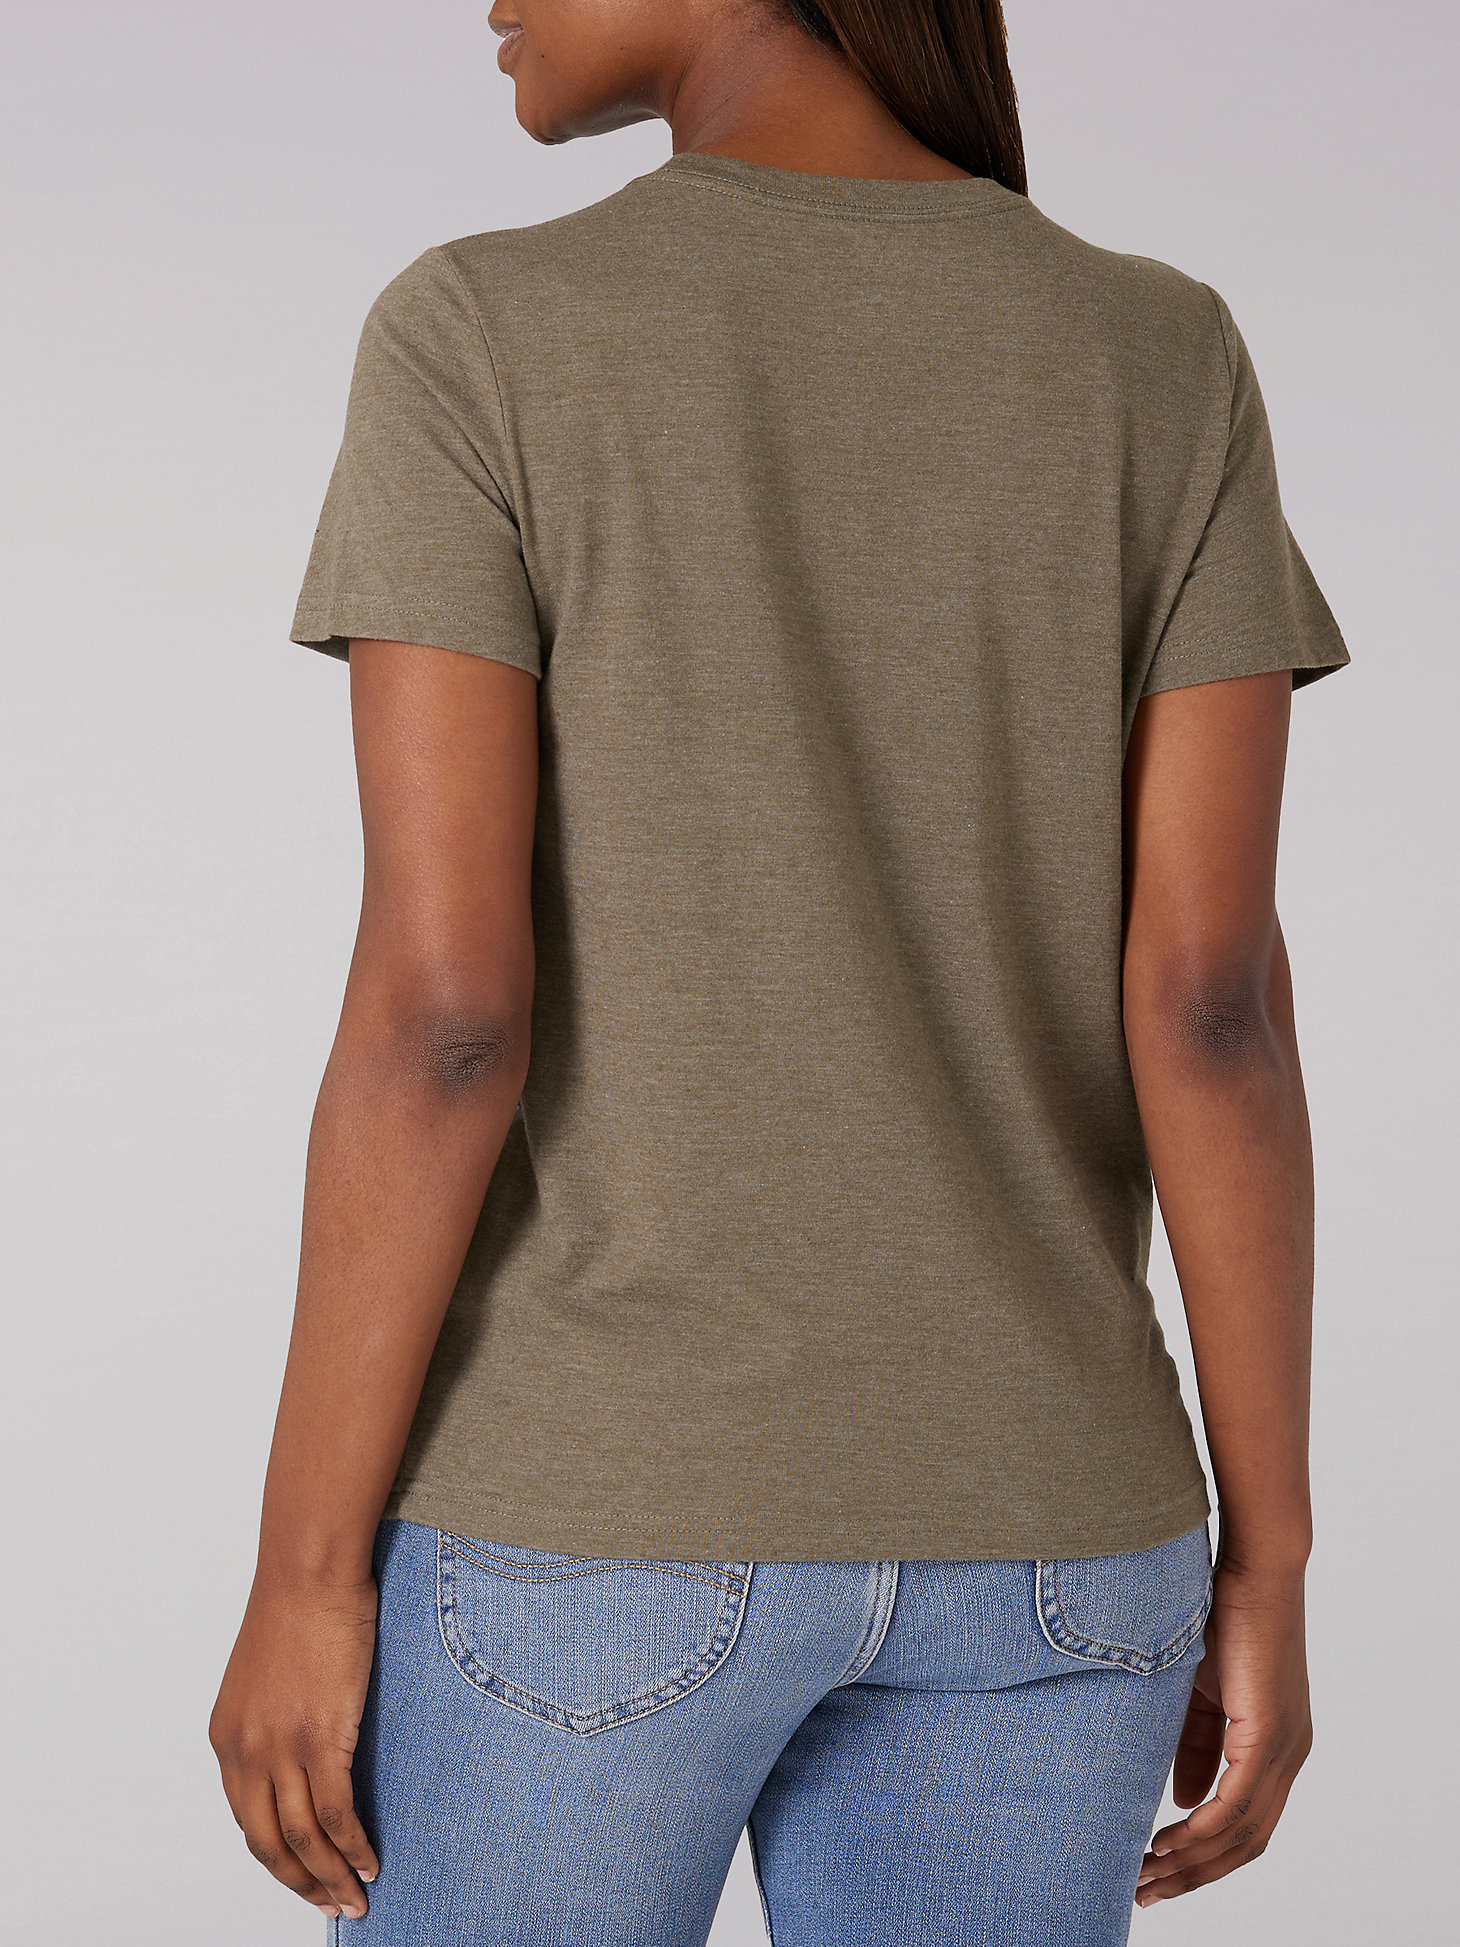 Women's Football Graphic Tee in Burnt Olive Heather alternative view 1